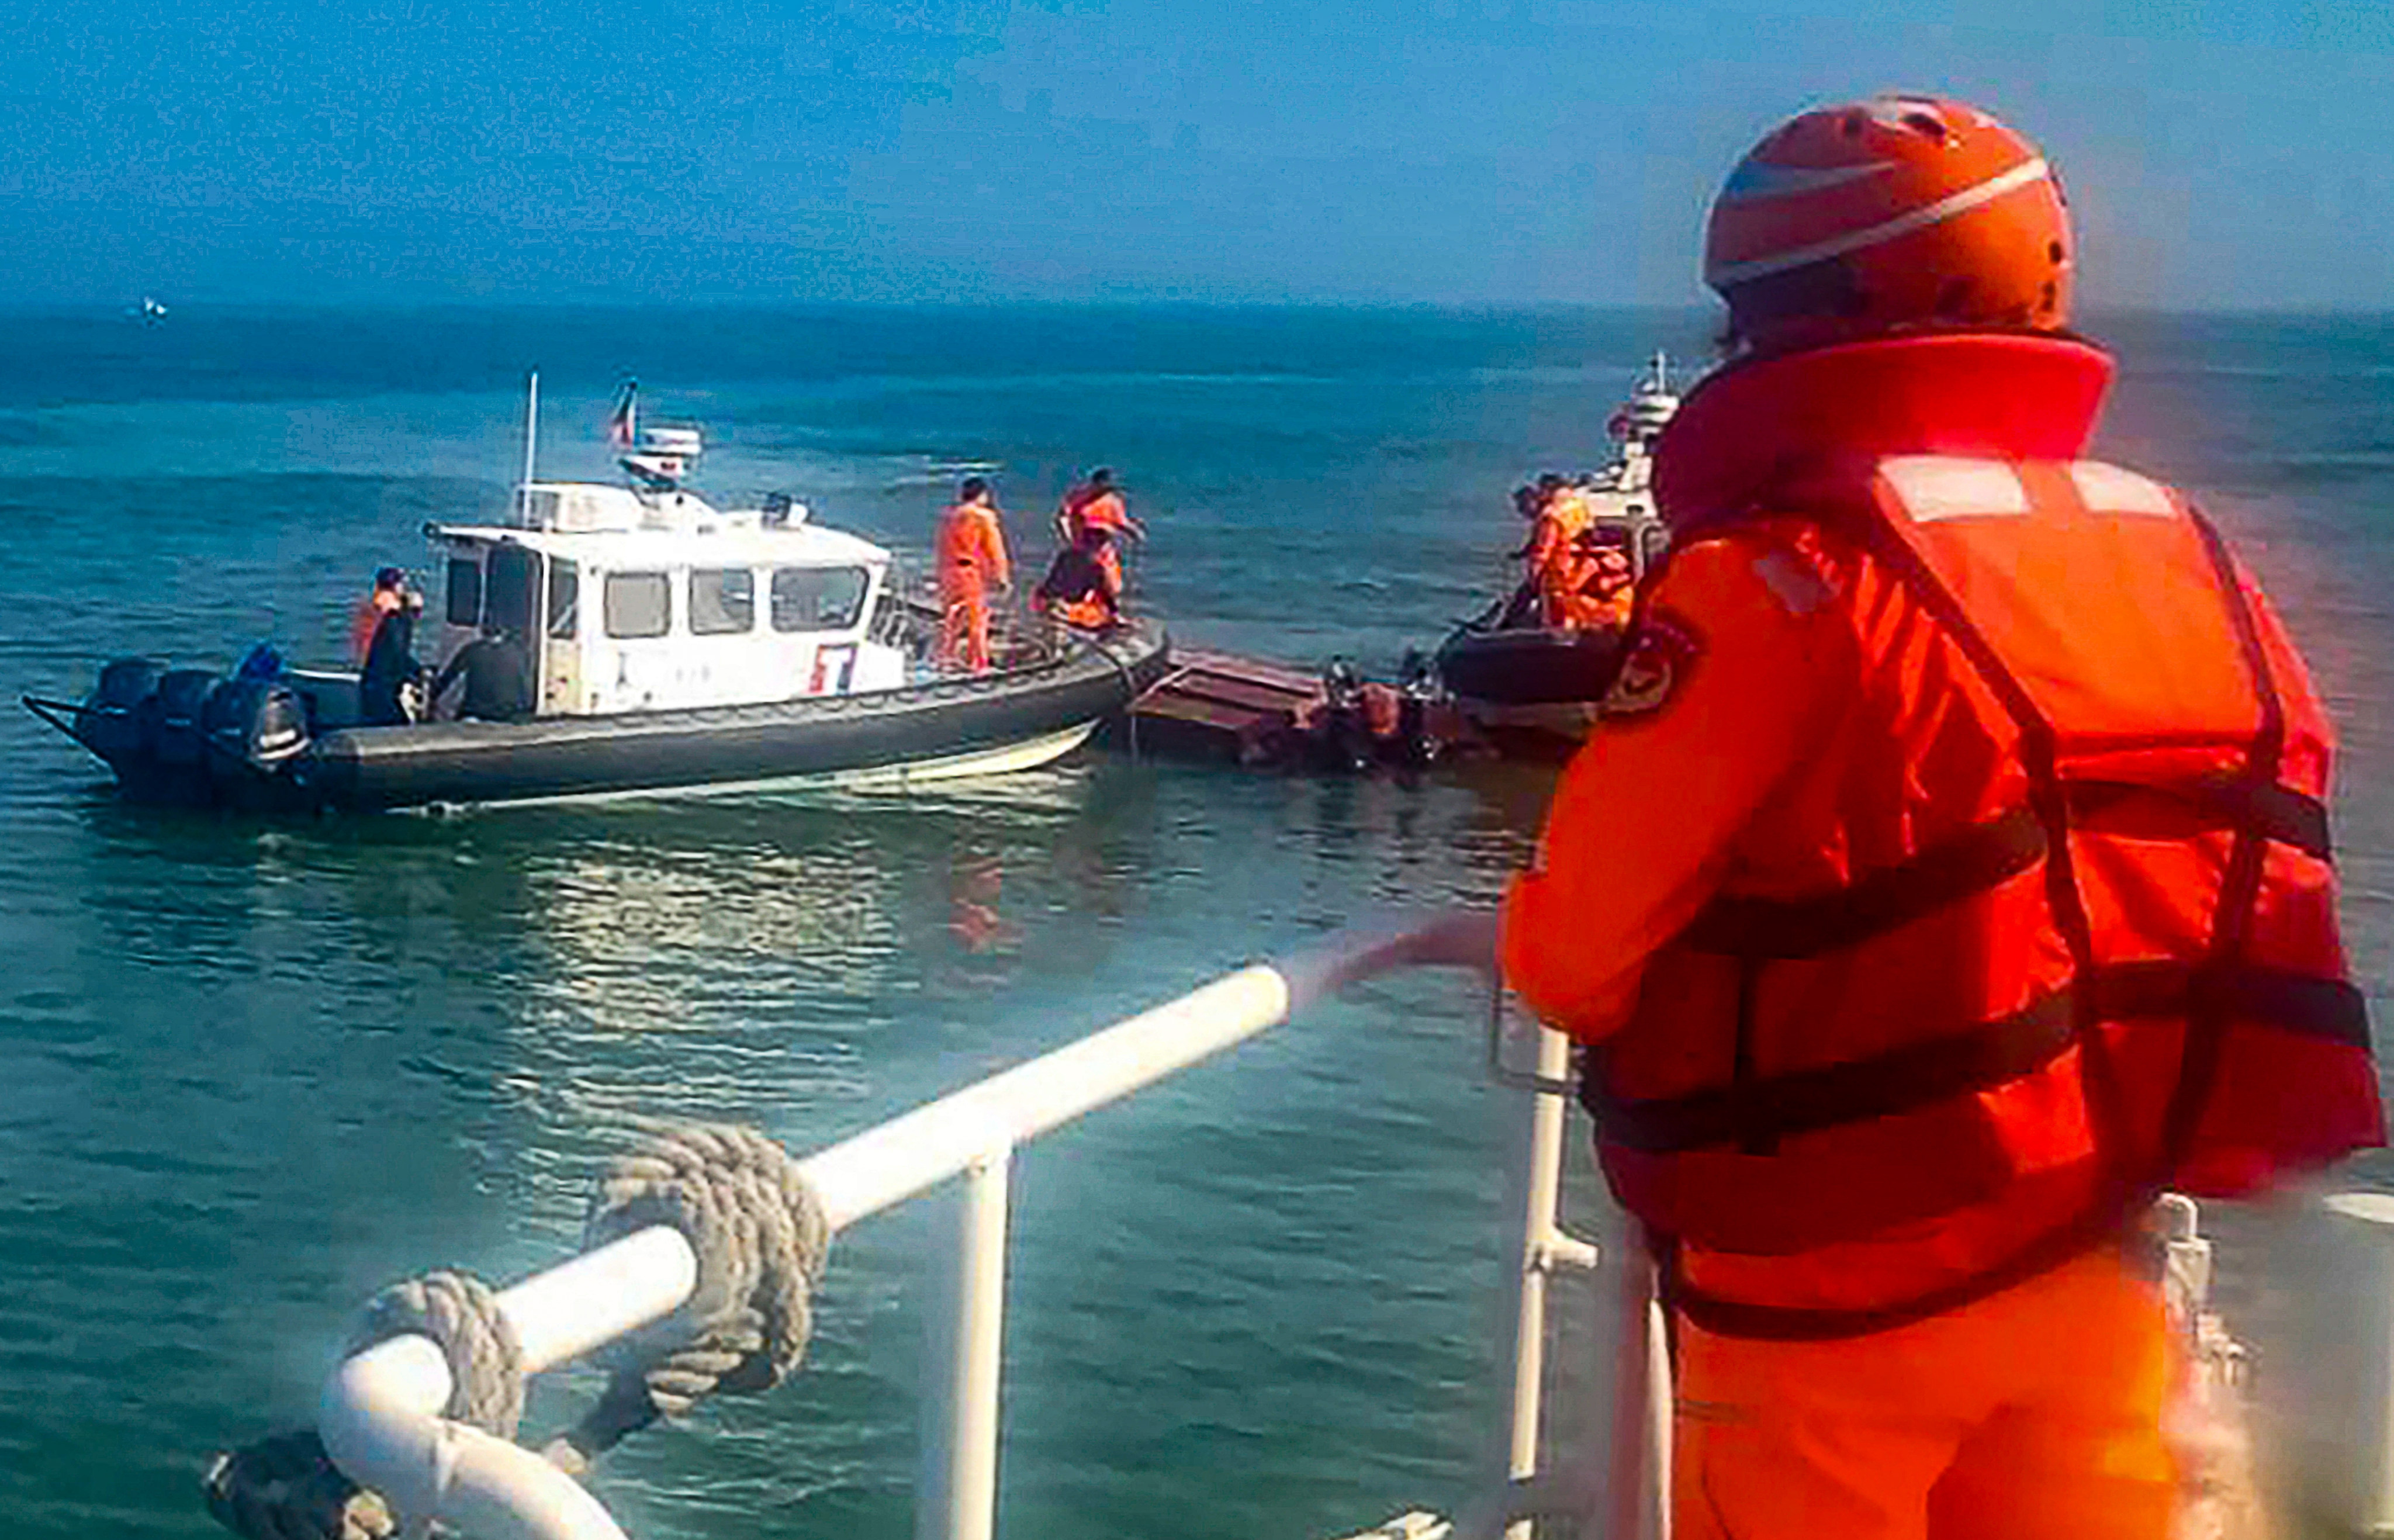 Taiwanese coastguard officers inspect a vessel that capsized during a chase off the coast of Quemoy on Wednesday. Photo: Taiwan Coast Guard Administration via AP 